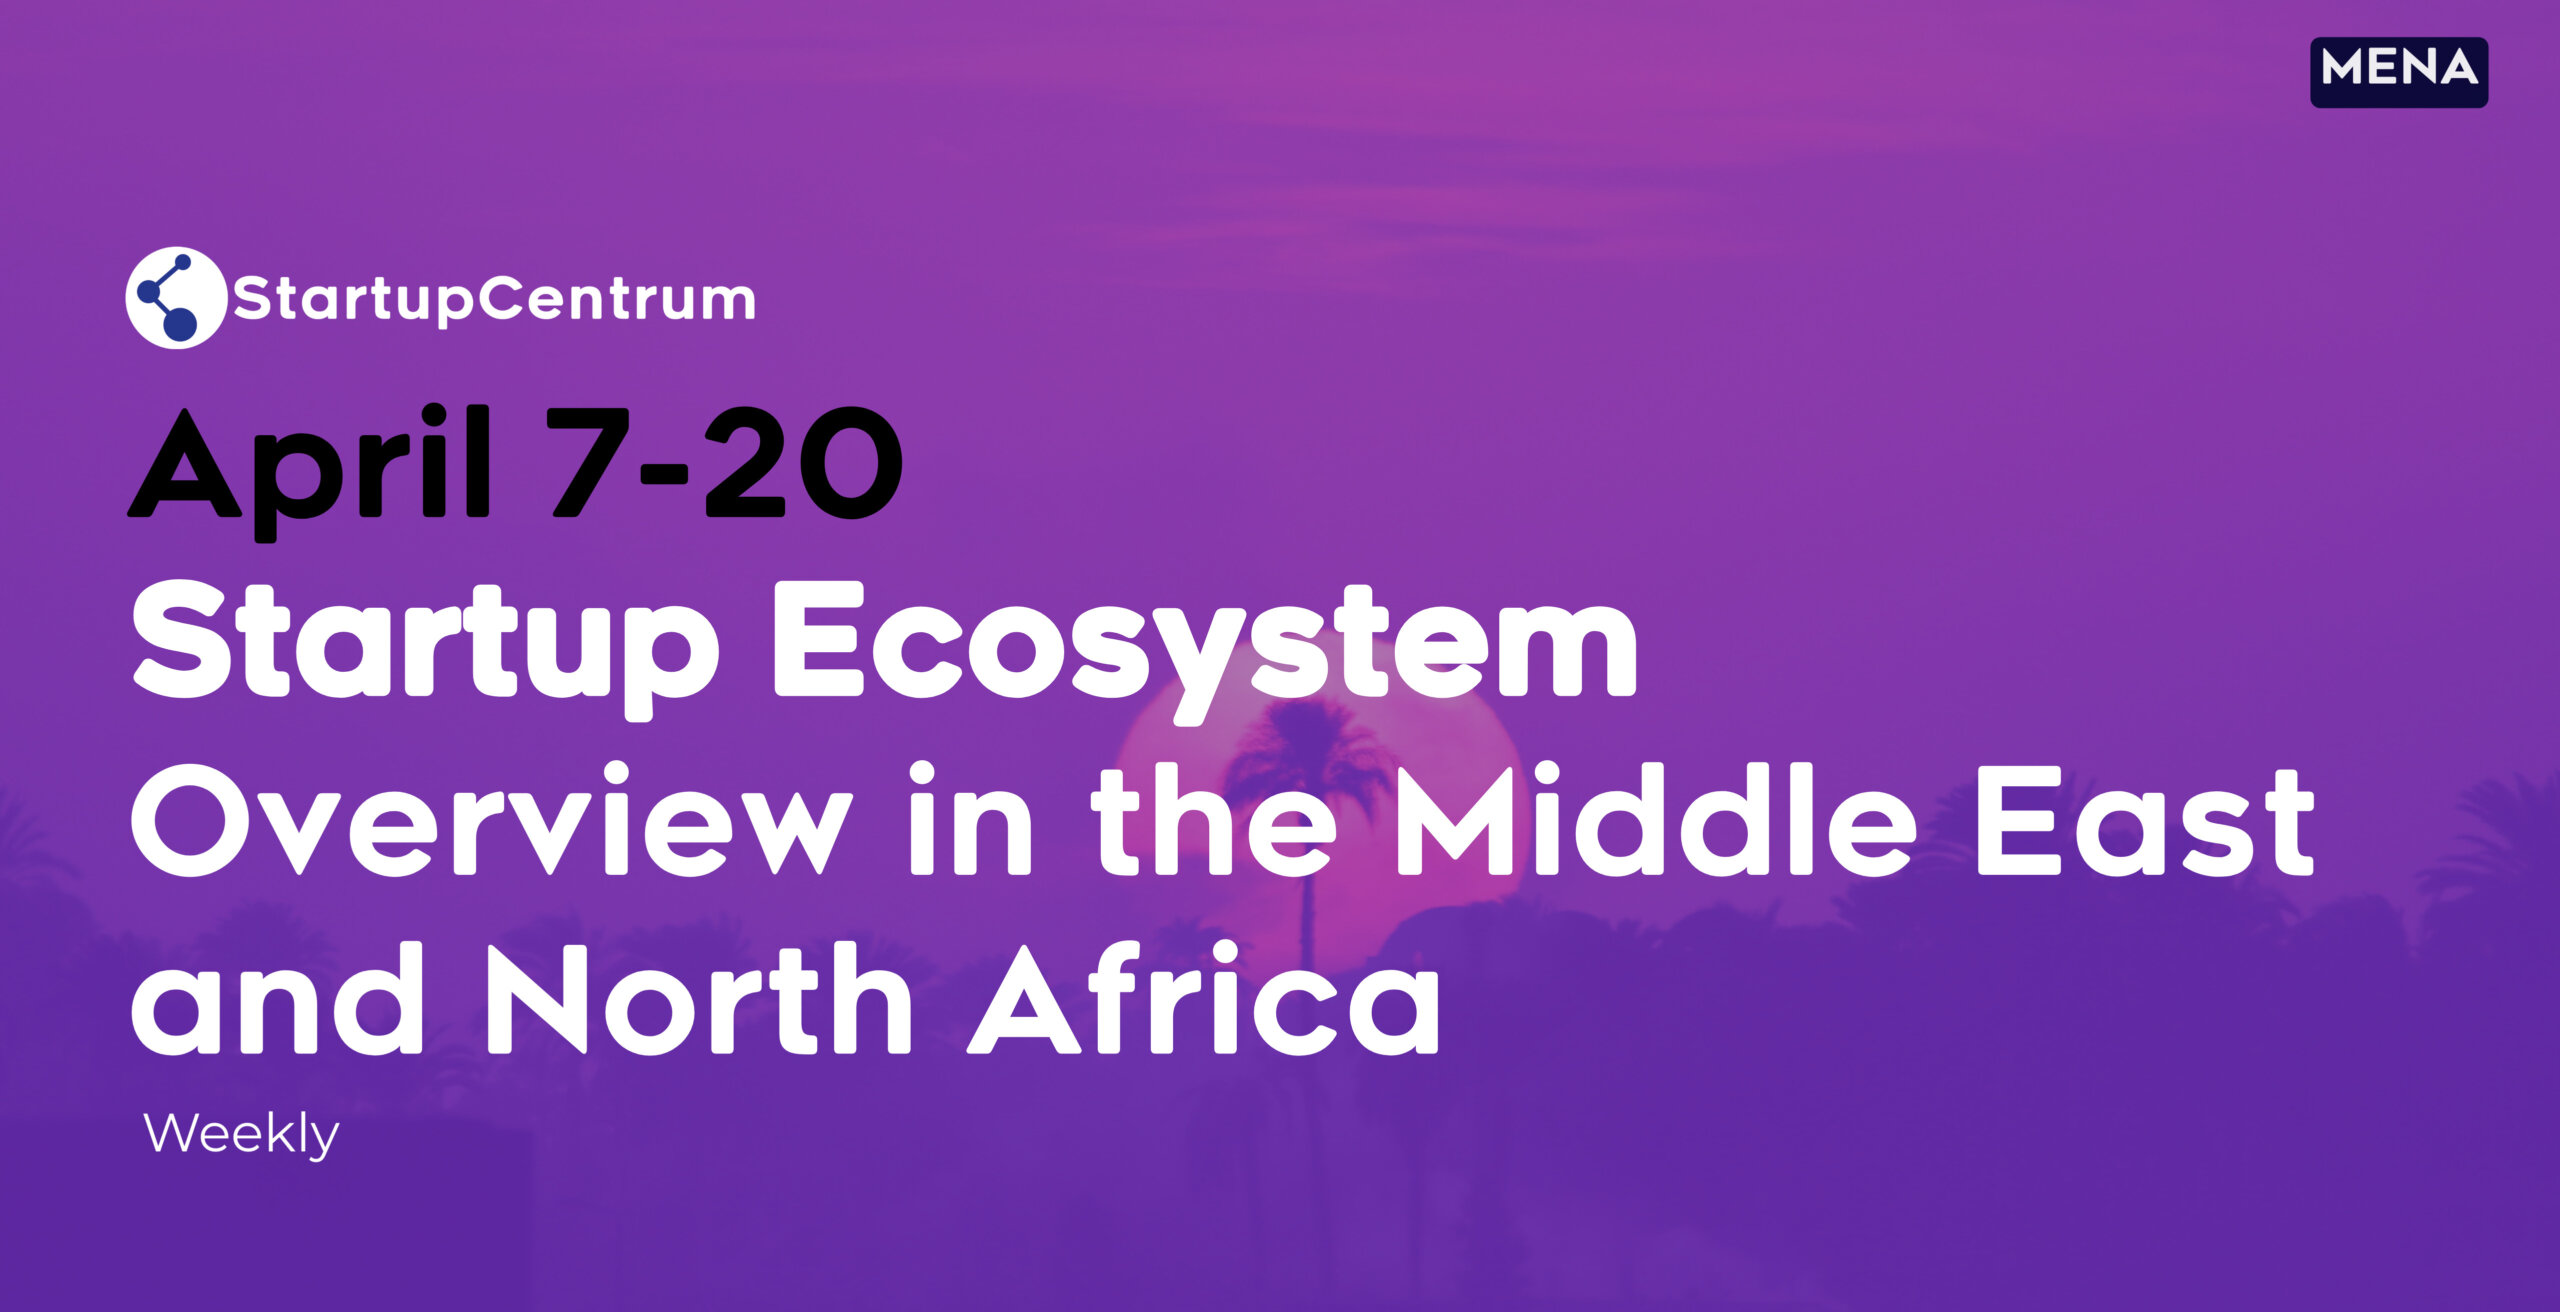 weekly-startup-ecosystem-overview-in-the-middle-east-and-north-africa